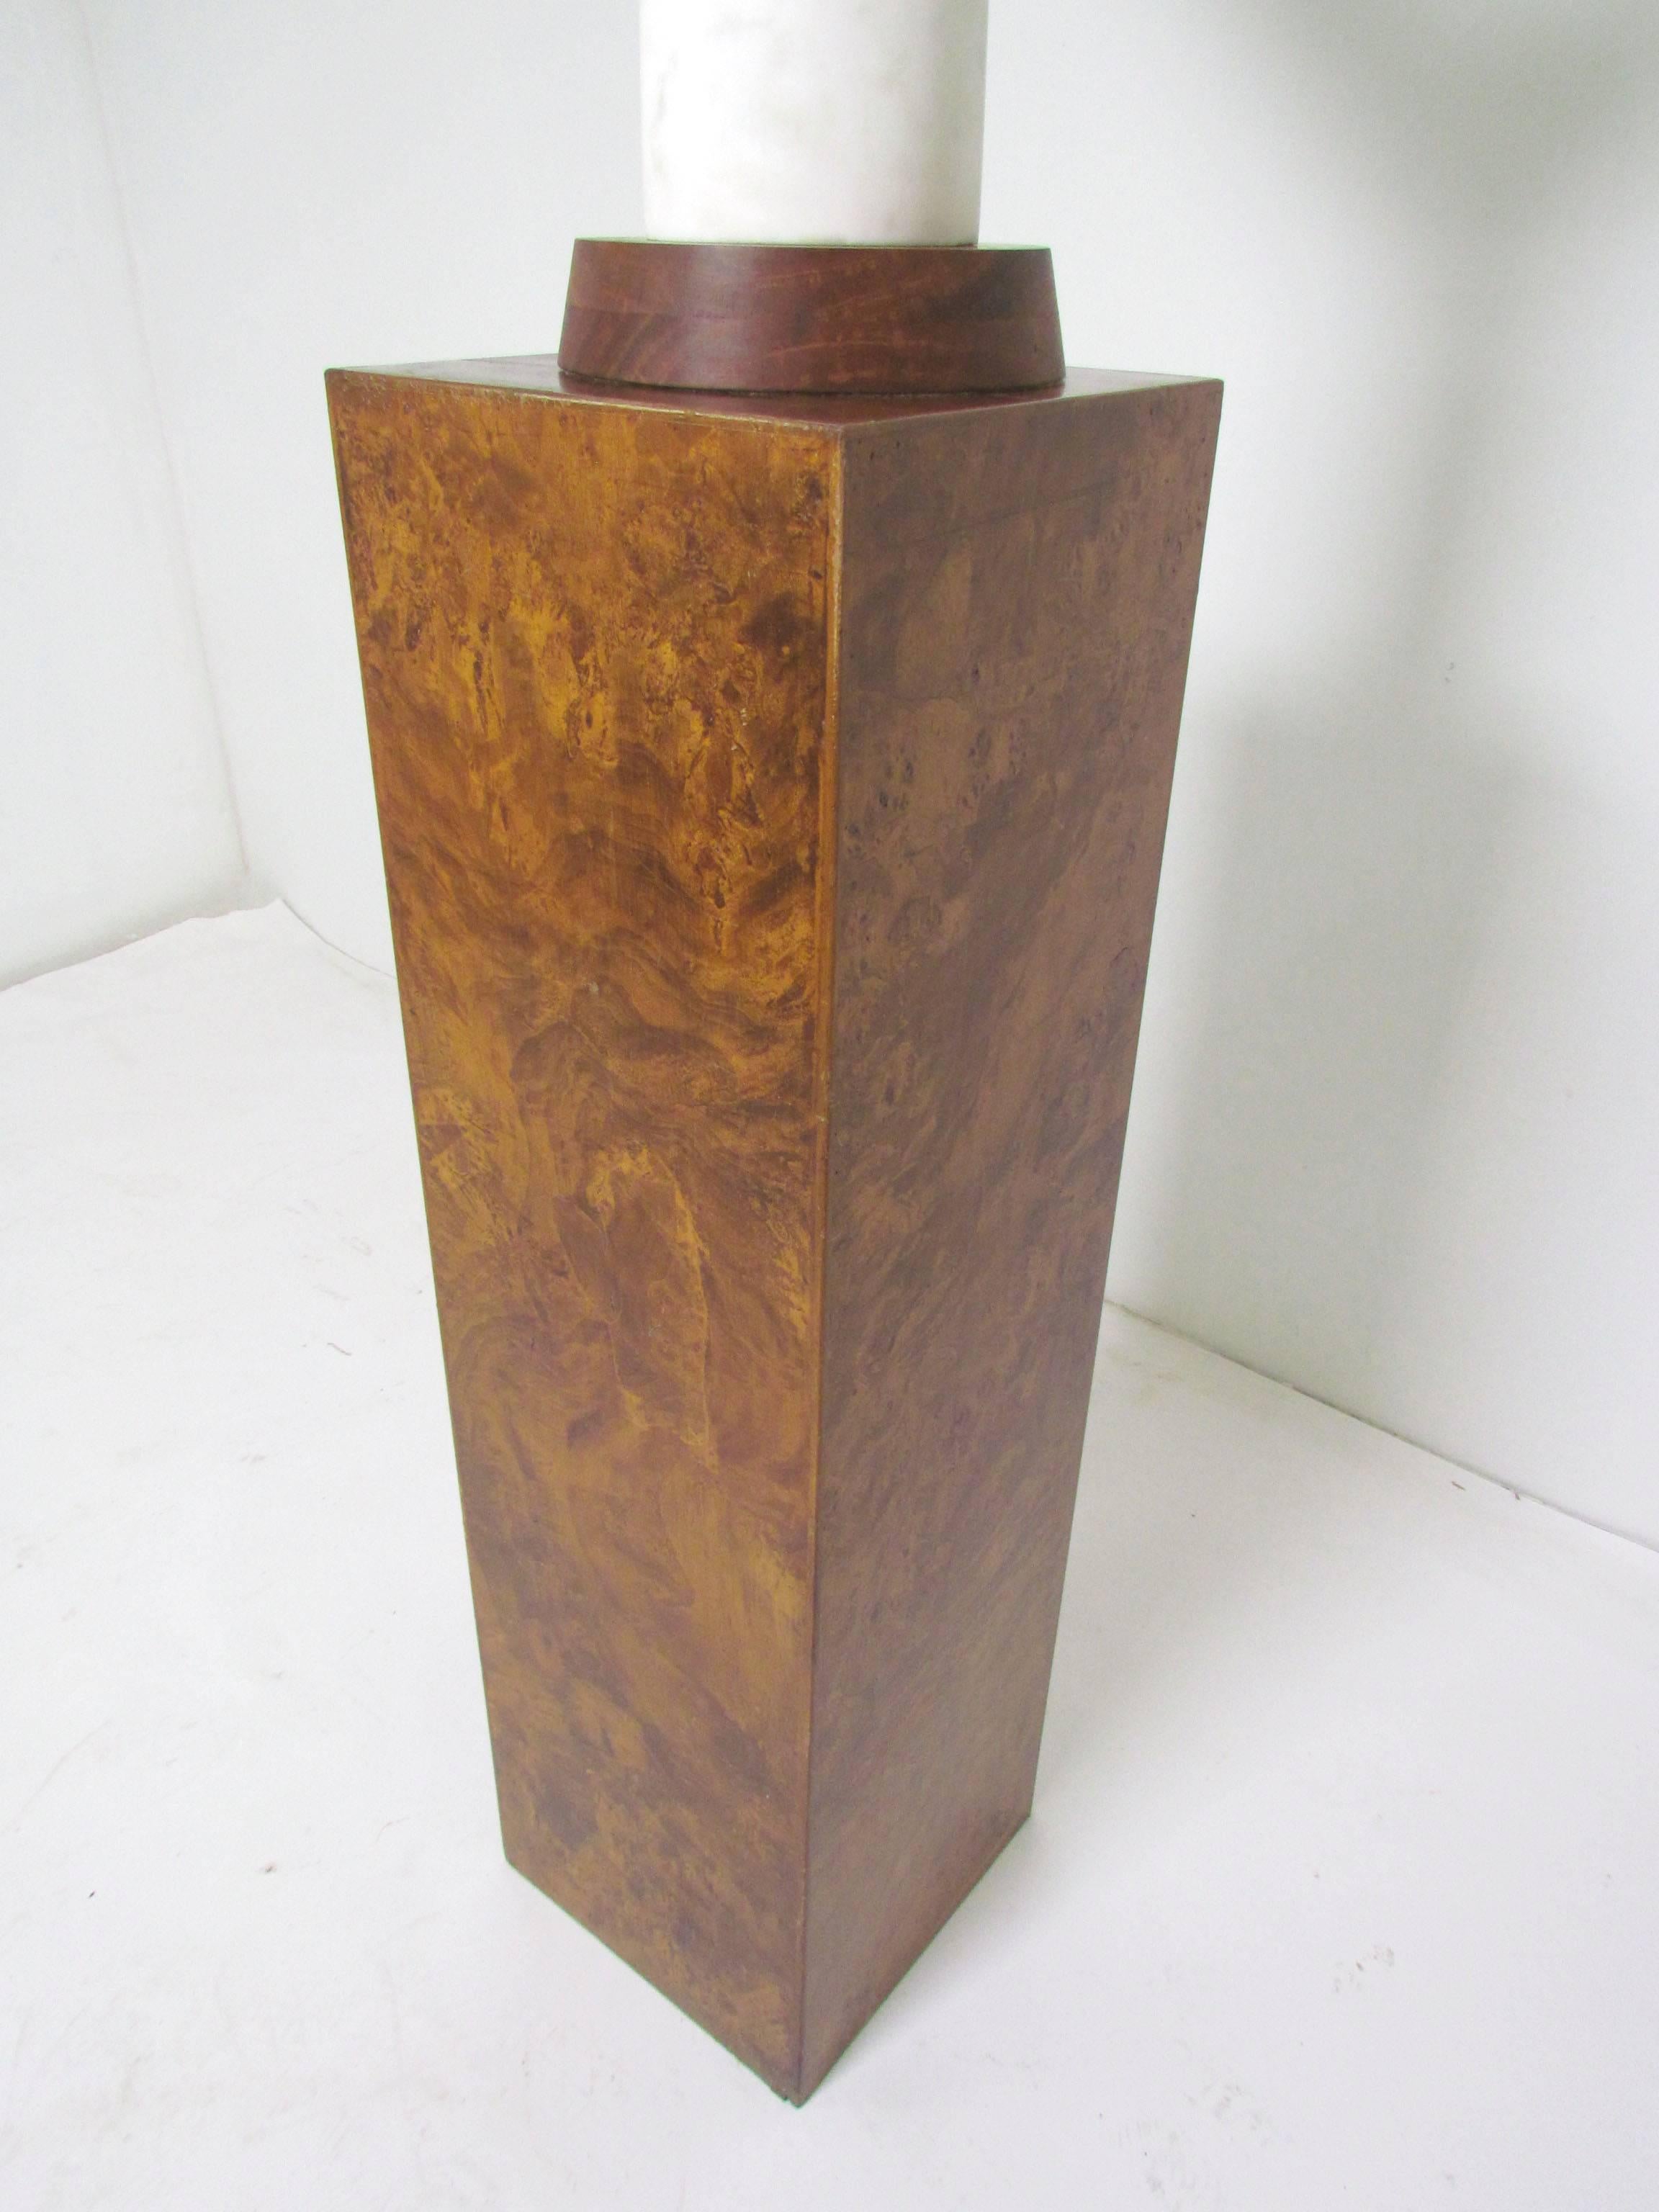 Mid-20th Century Abstract Marble Sculpture Signed M. Sokell, Dated 1969, with Burl Pedestal